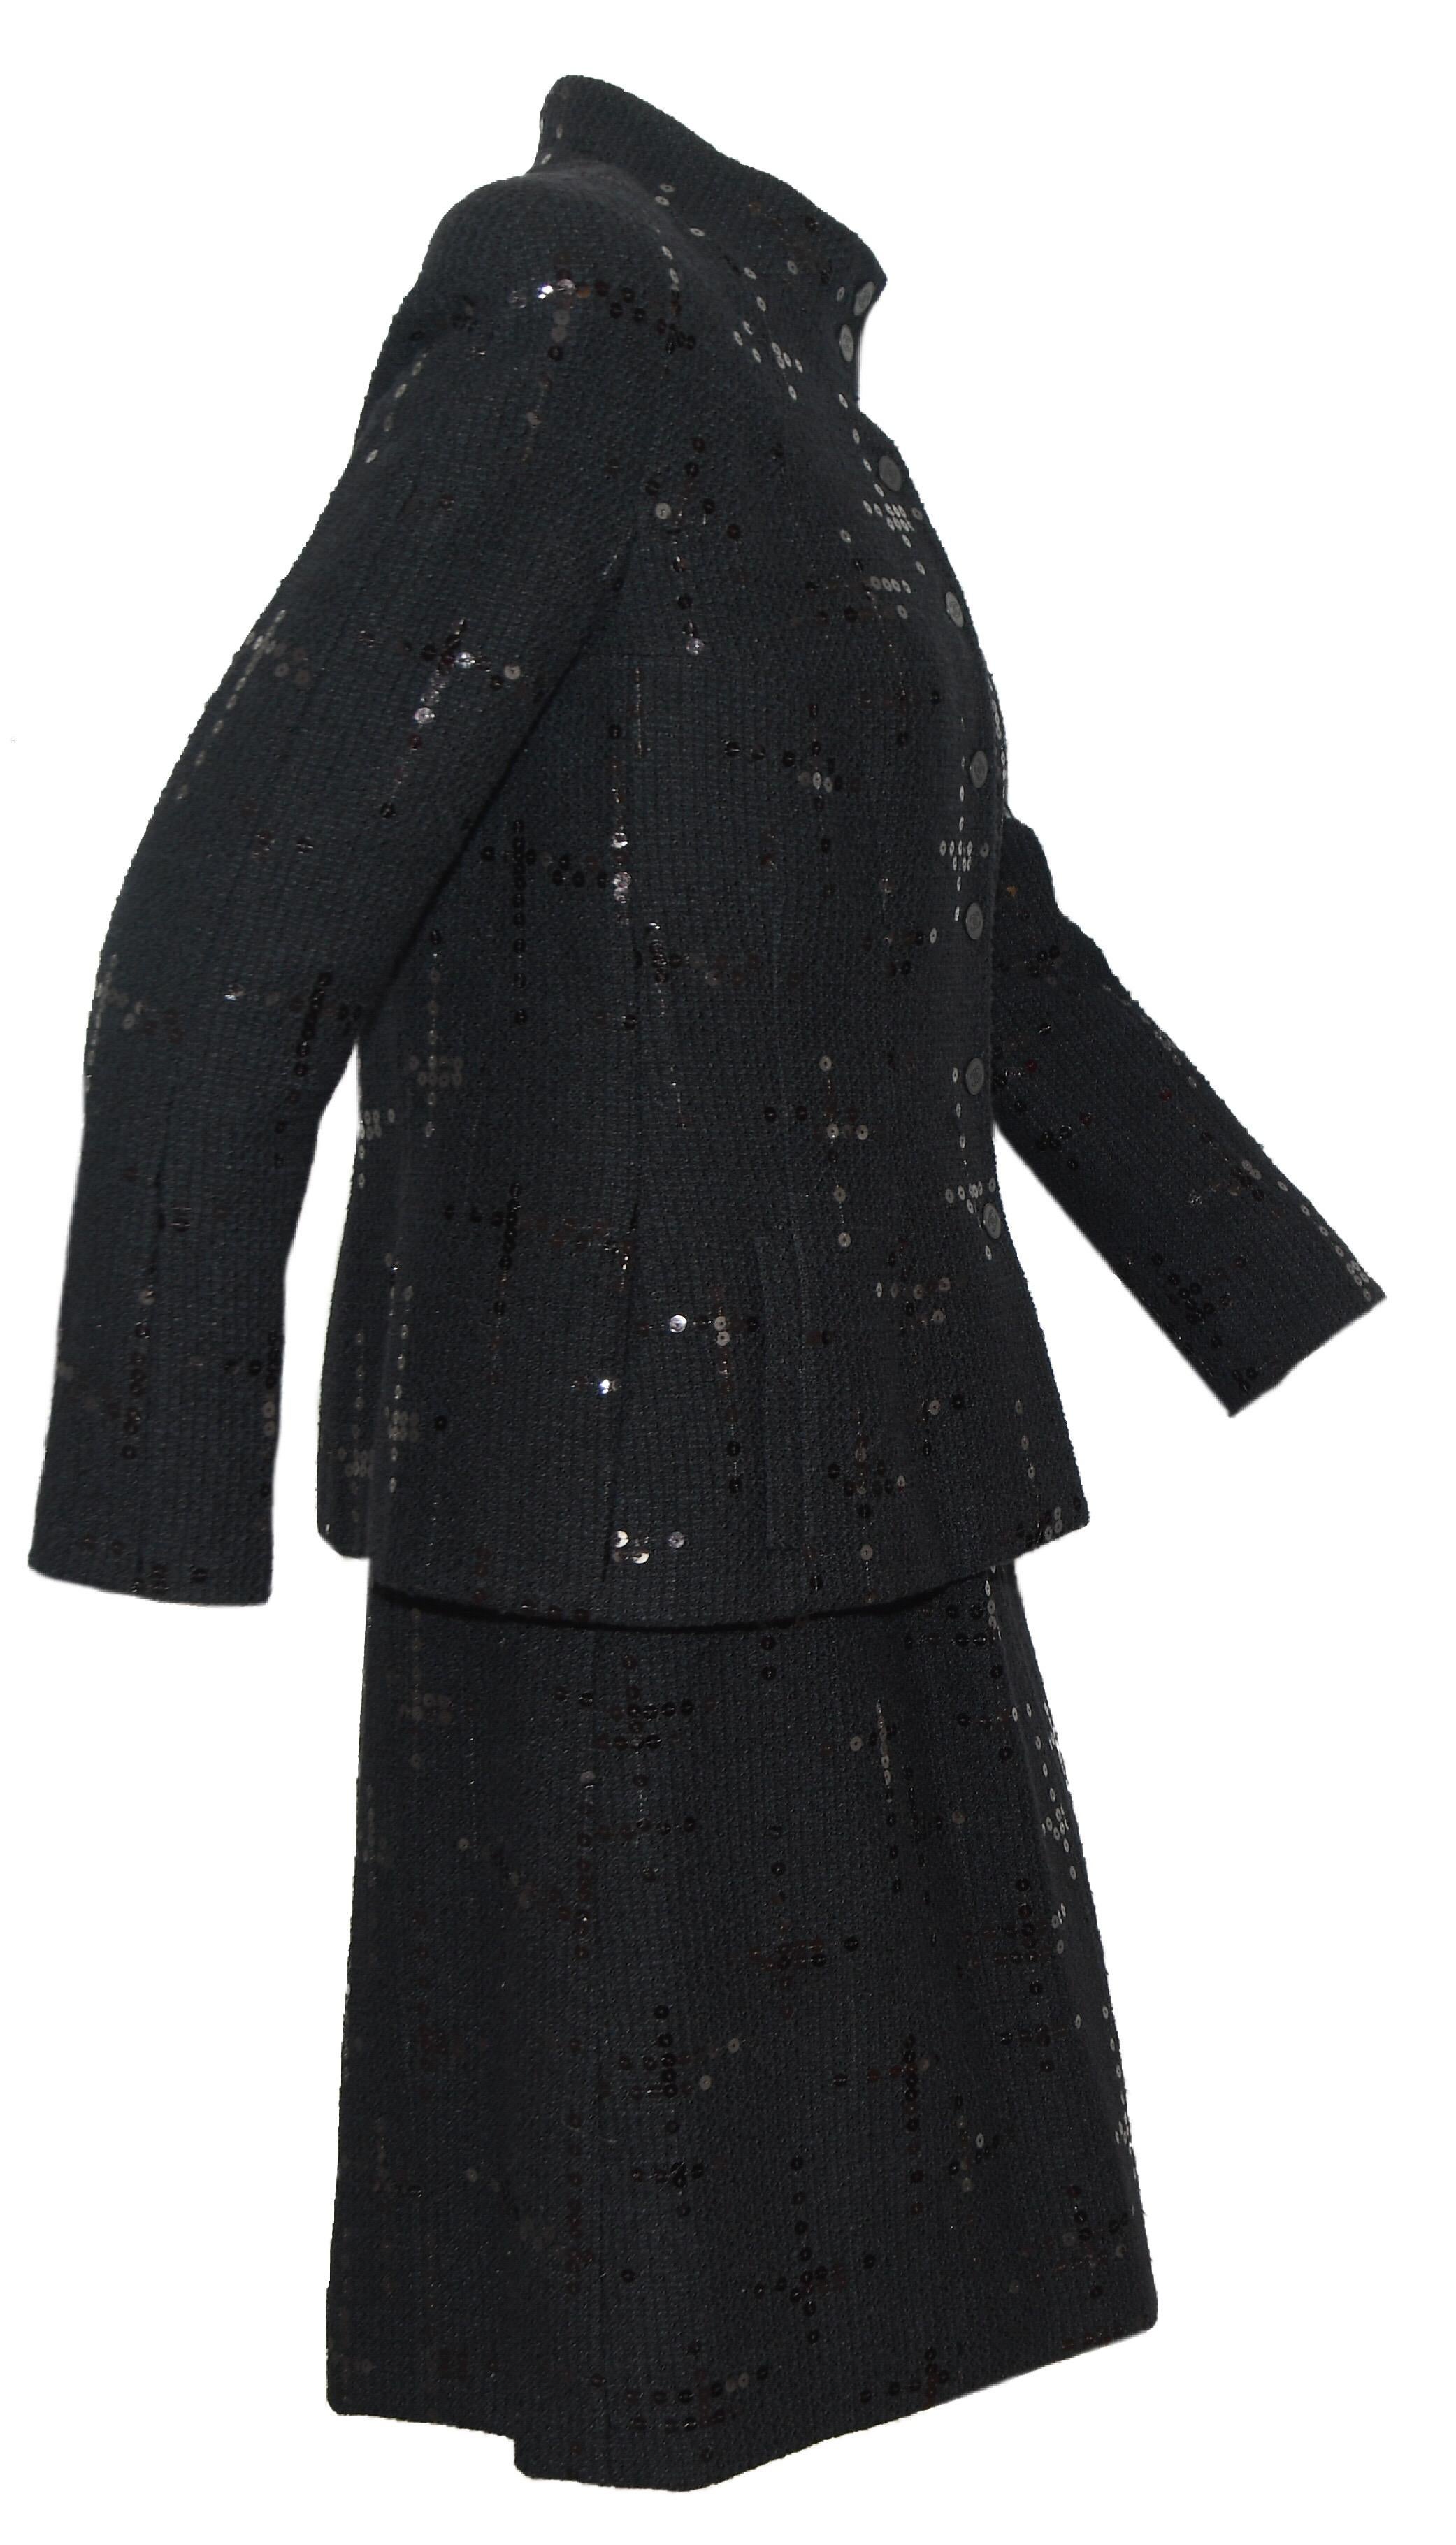 Chanel black tweed skirt suit decorated with scattered black sequins throughout.  The jacket has an up collar with 2 CC buttons and 5 same buttons at front for closure.   Jacket contains two side slit pockets and is lined in Chanel CC logo black